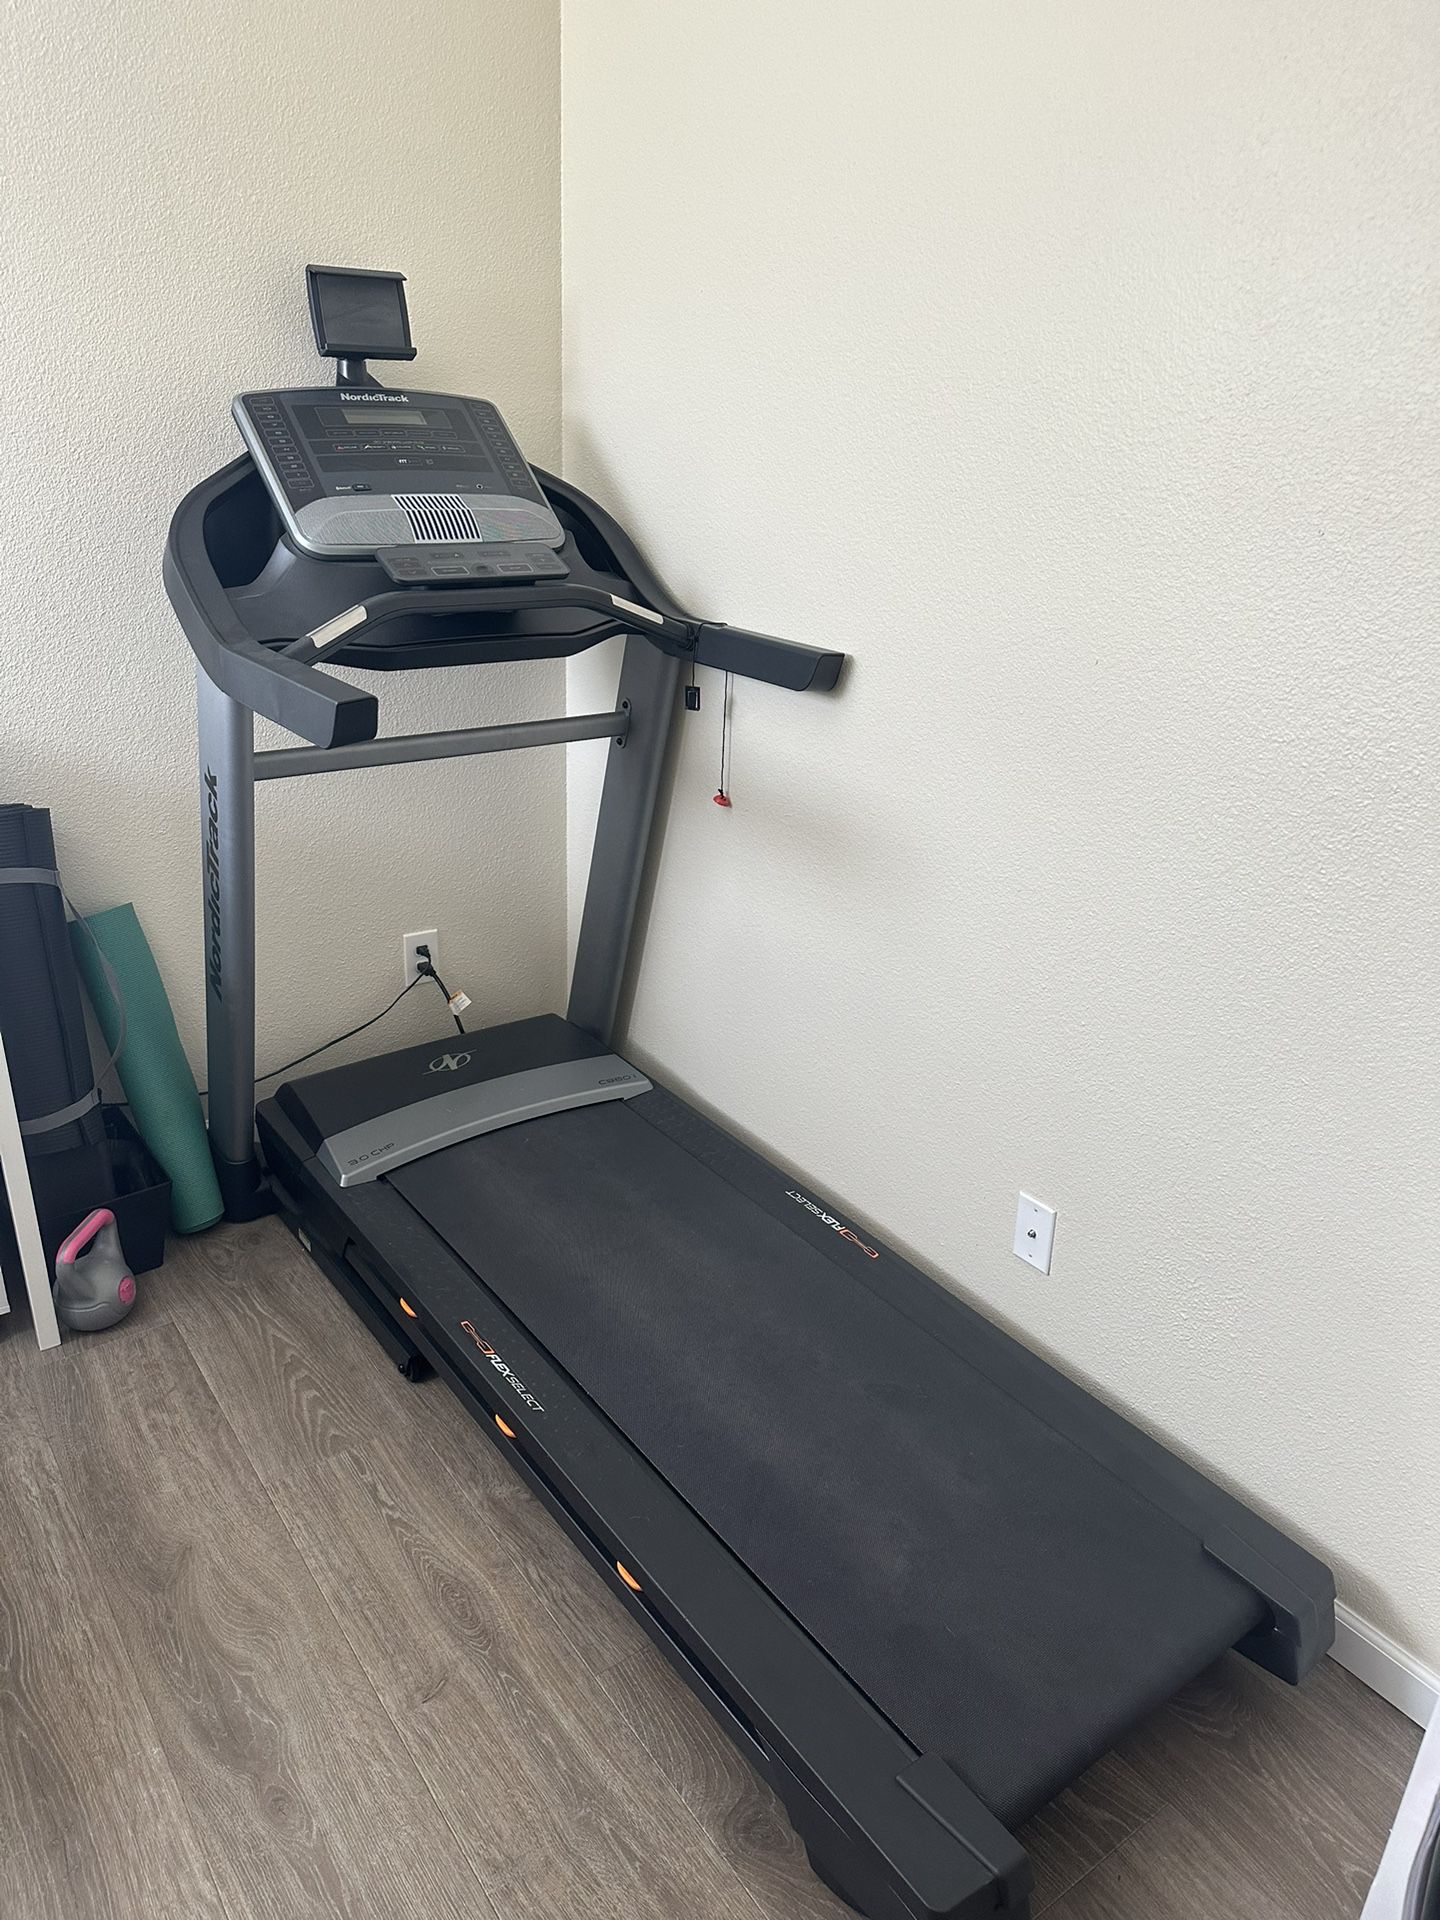 NordicTrack SMART C960I Treadmill with 1-Year iFit Membership